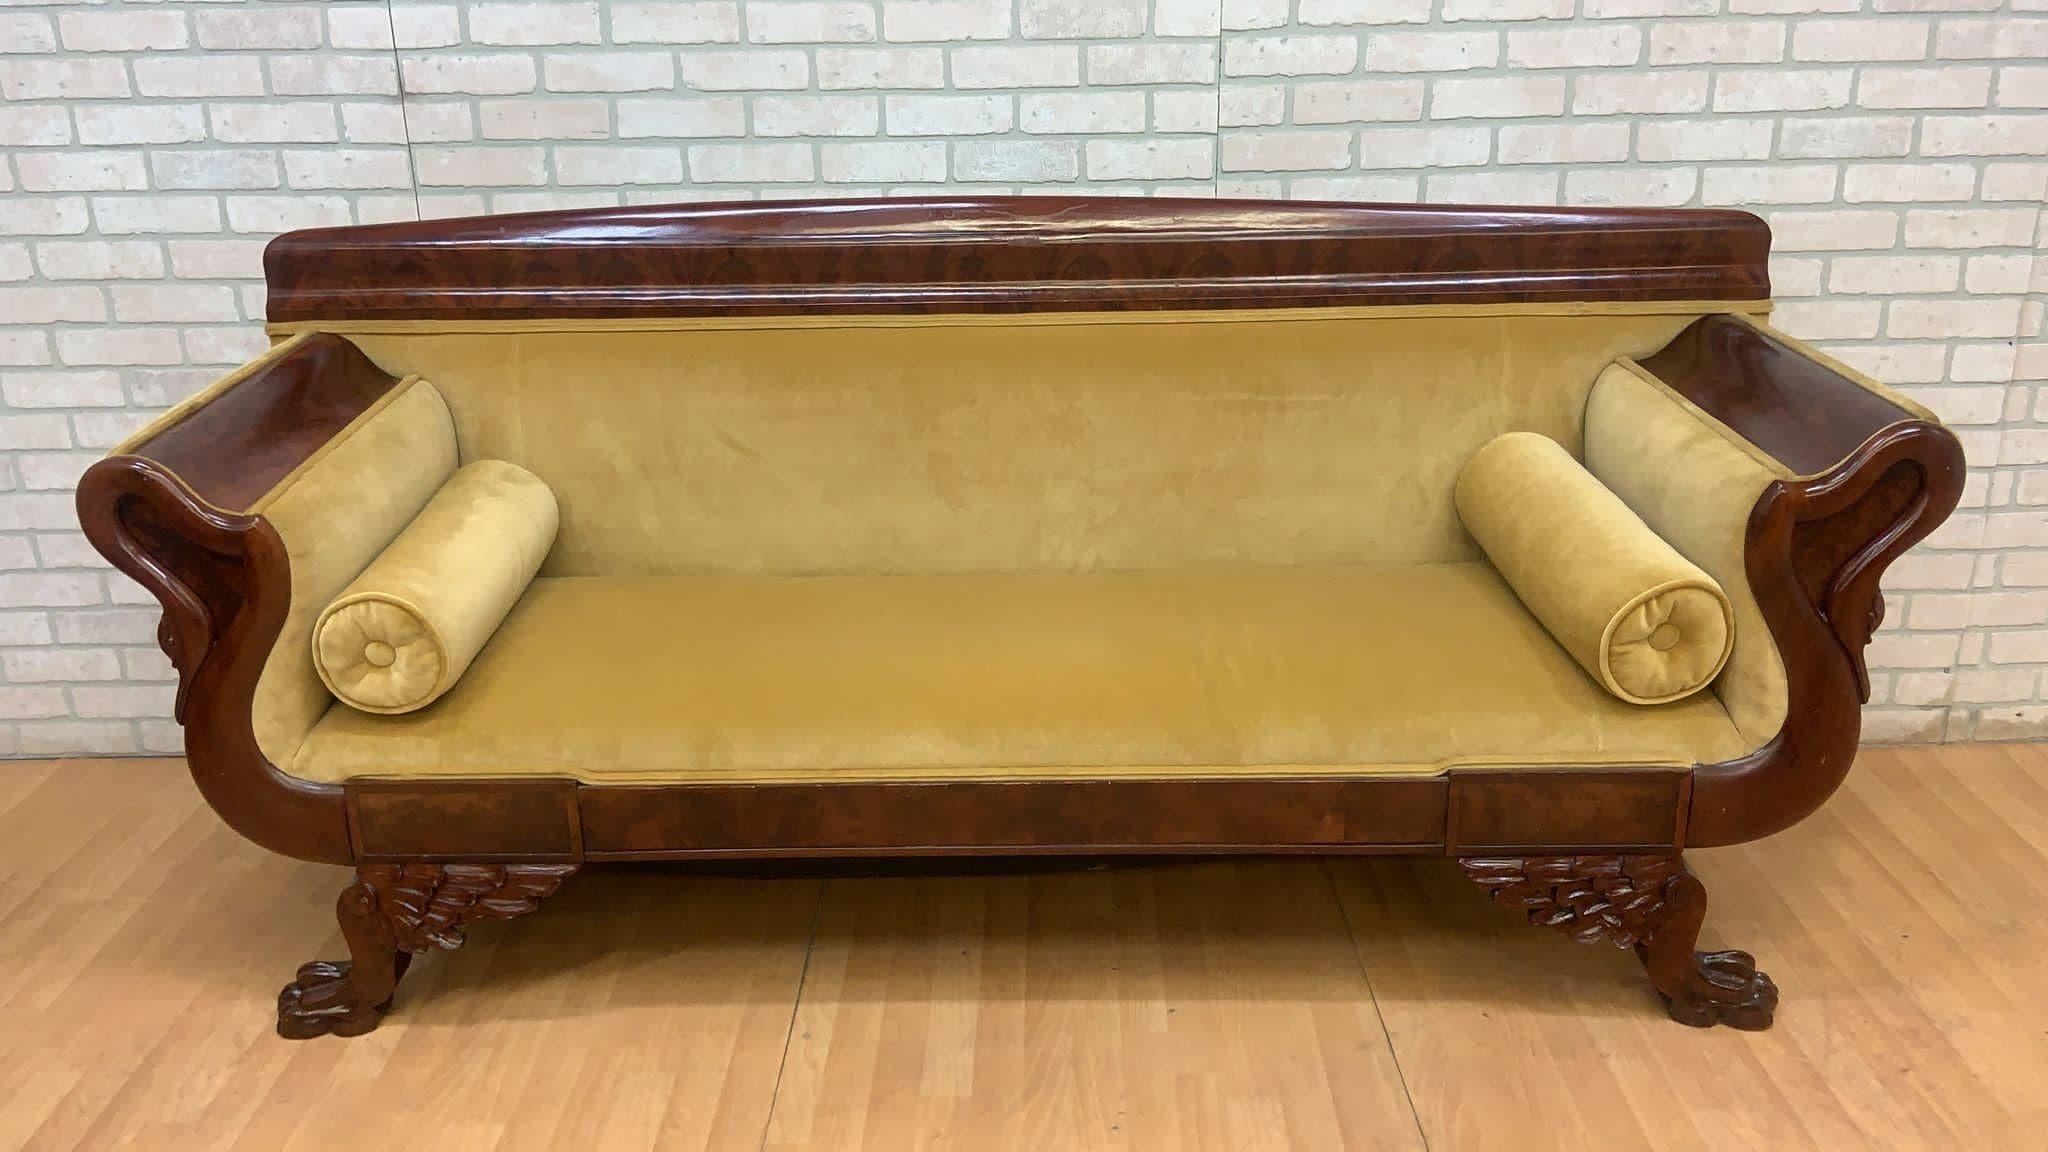 Antique Empire Style Mahogany Swan Grecian Sofa in Yellow

Antique Classic Empire style carved mahogany Grecian sofa upholstered in yellow gold velvet. The sofa has carved swans head arm rest, carved corner cornucopia and standing on ebonized